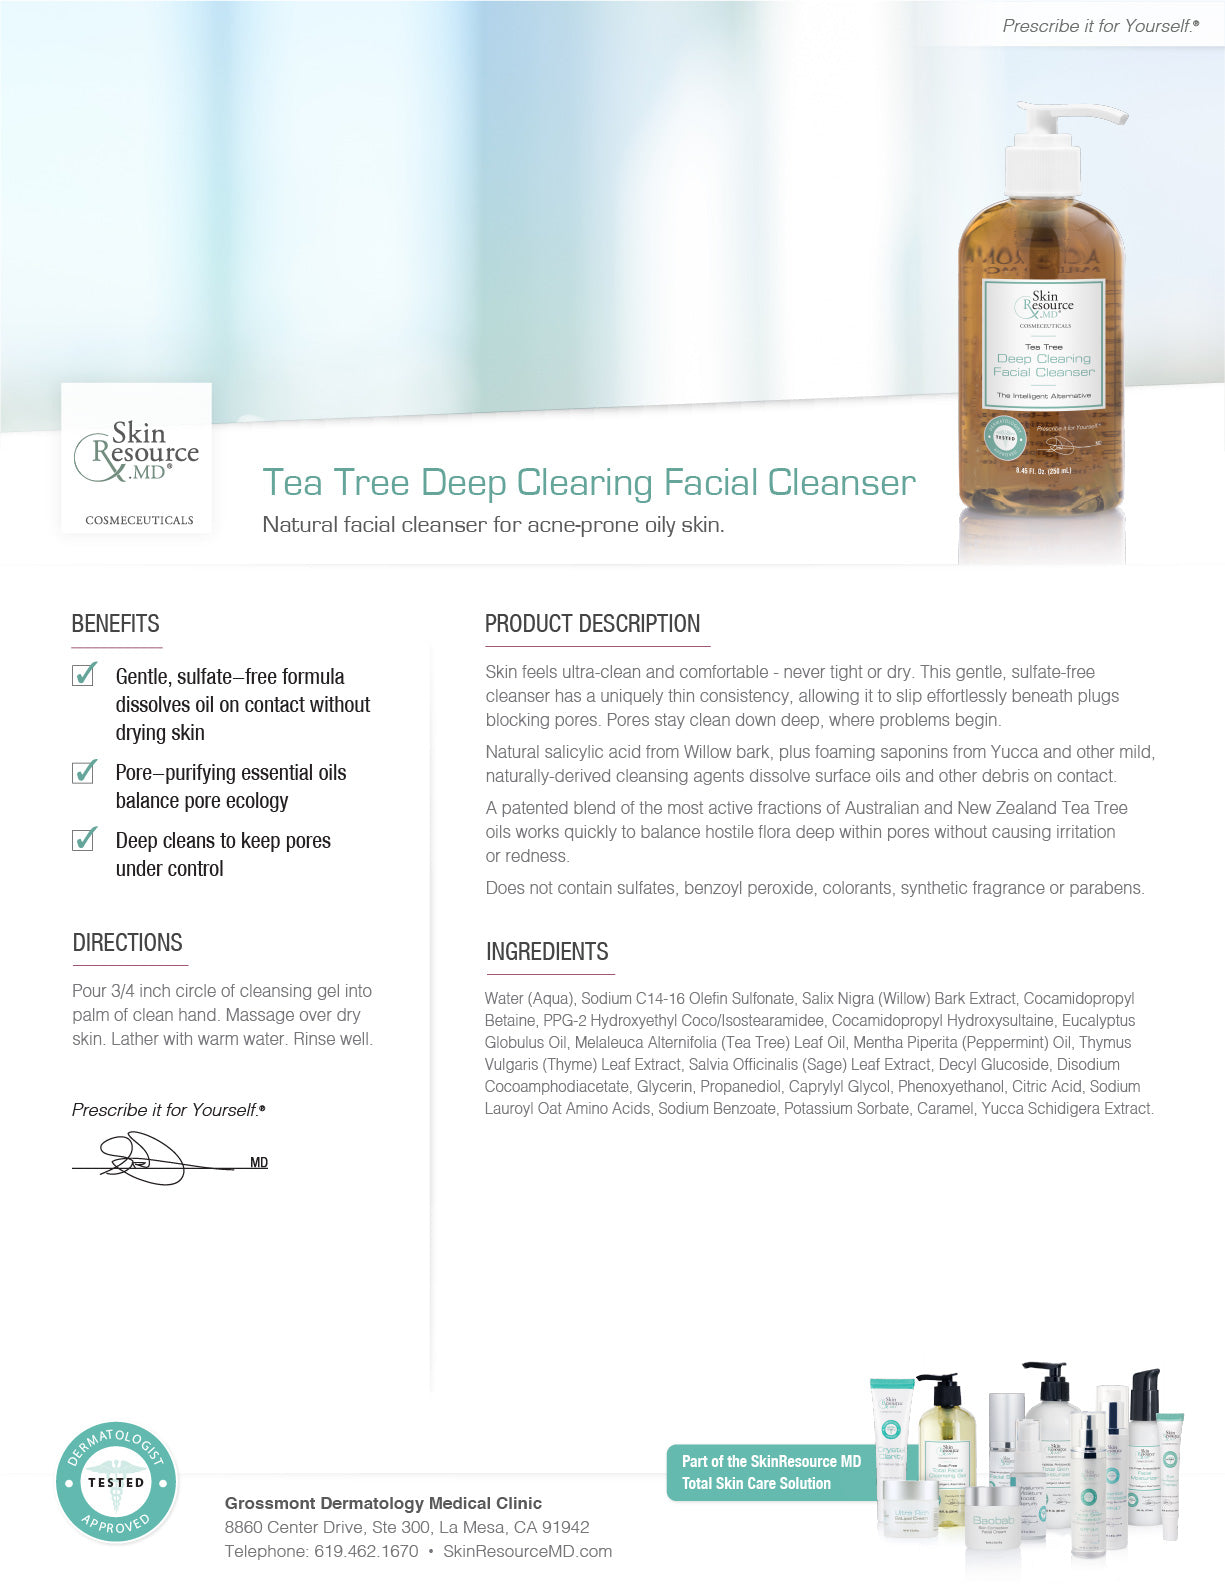 Tea Tree Deep Clearing Facial Cleanser (formerly Pore-Clearing Cleanser)